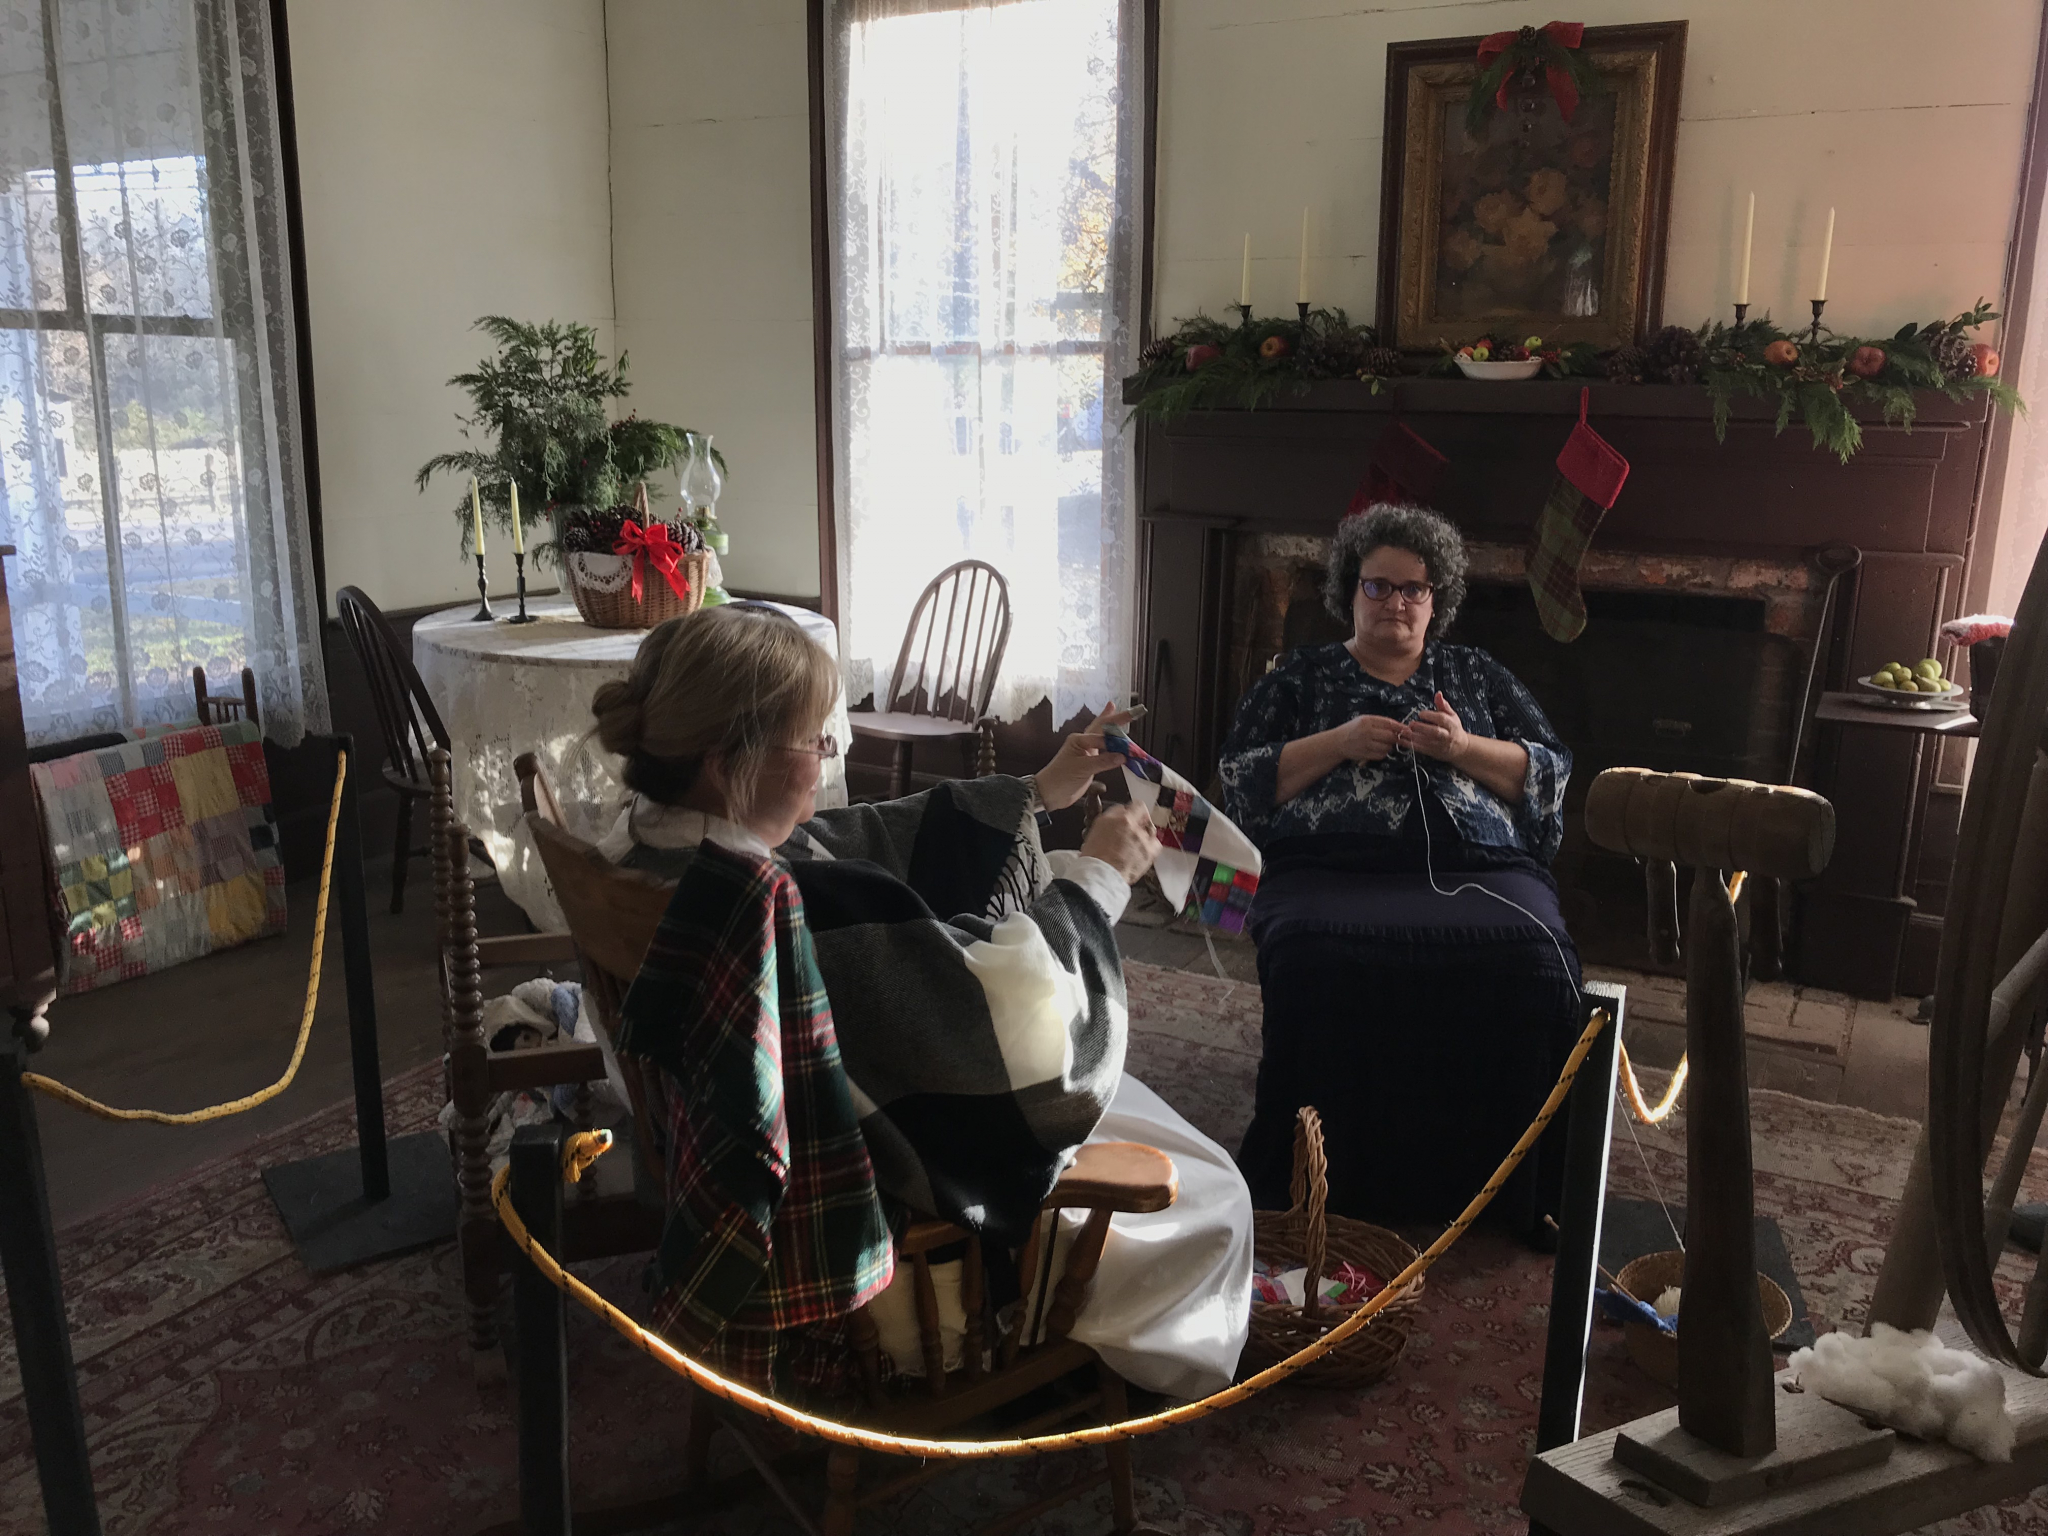 Bessemer, McCalla, Alabama, Eastern Valley Road, West Jefferson County Historical Society, Christmas Heritage Tour, Pioneer Homes, Owen House